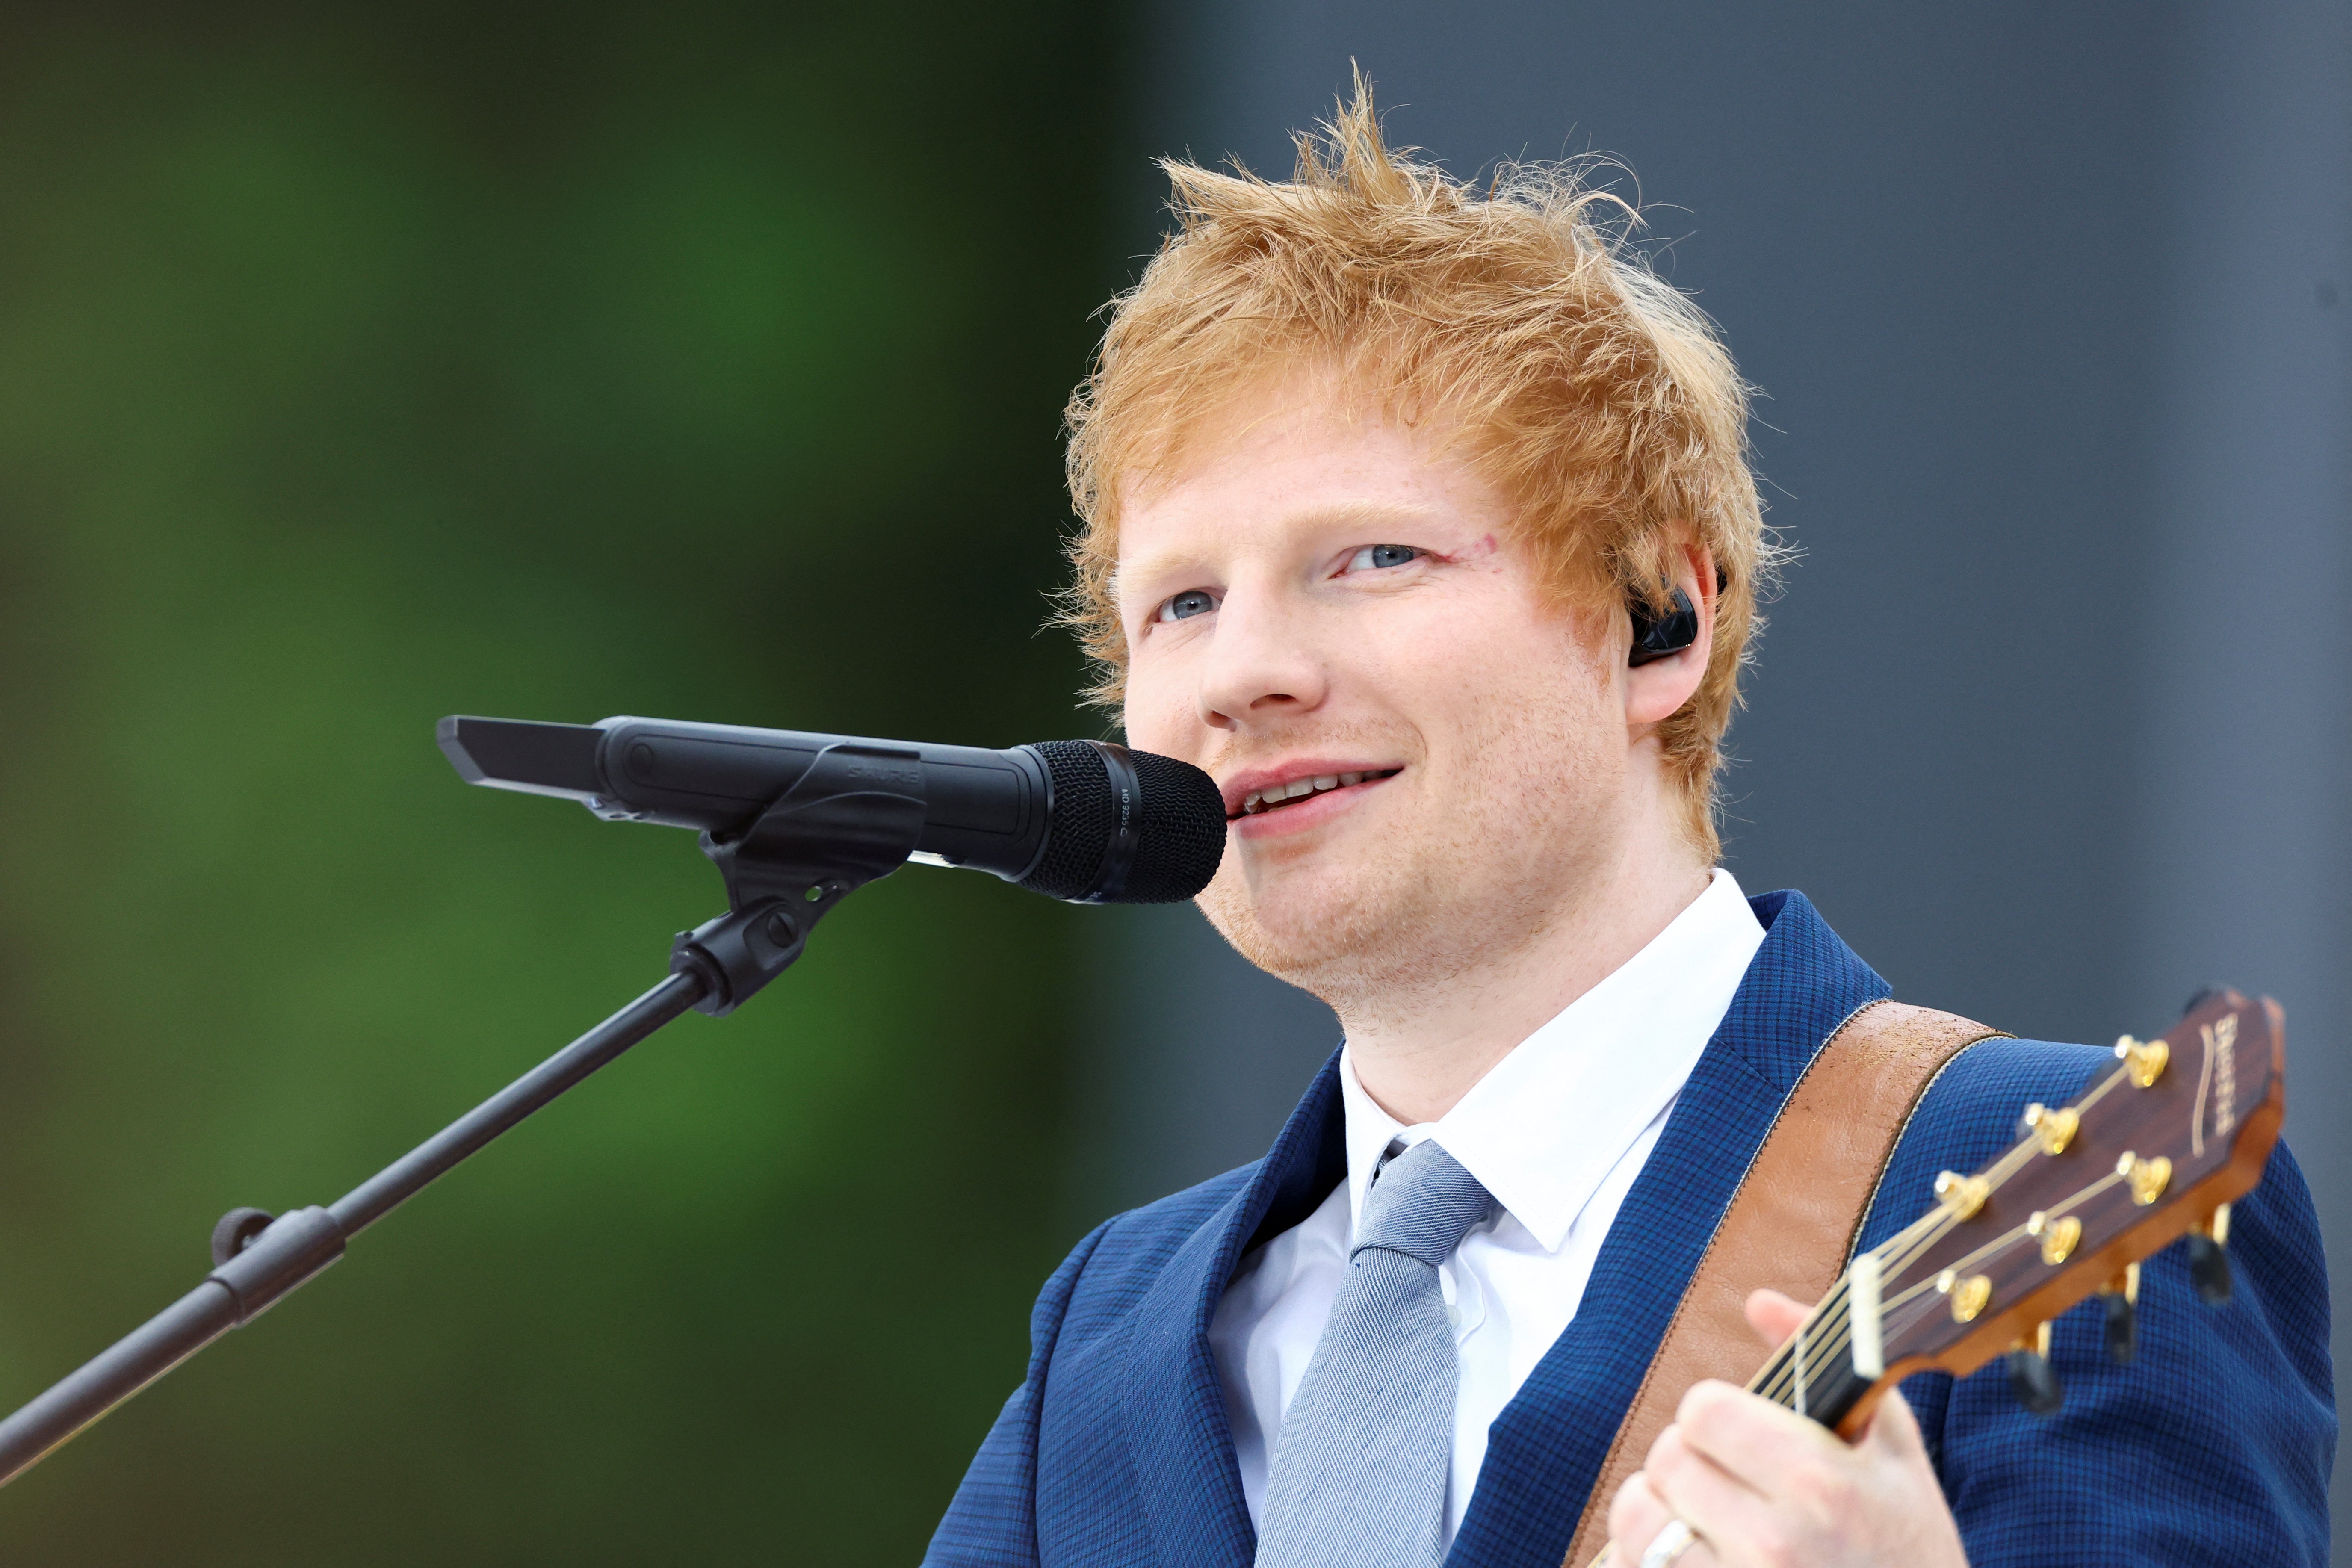 Sheeran performed at the Queen’s Jubilee Pageant on 5 June